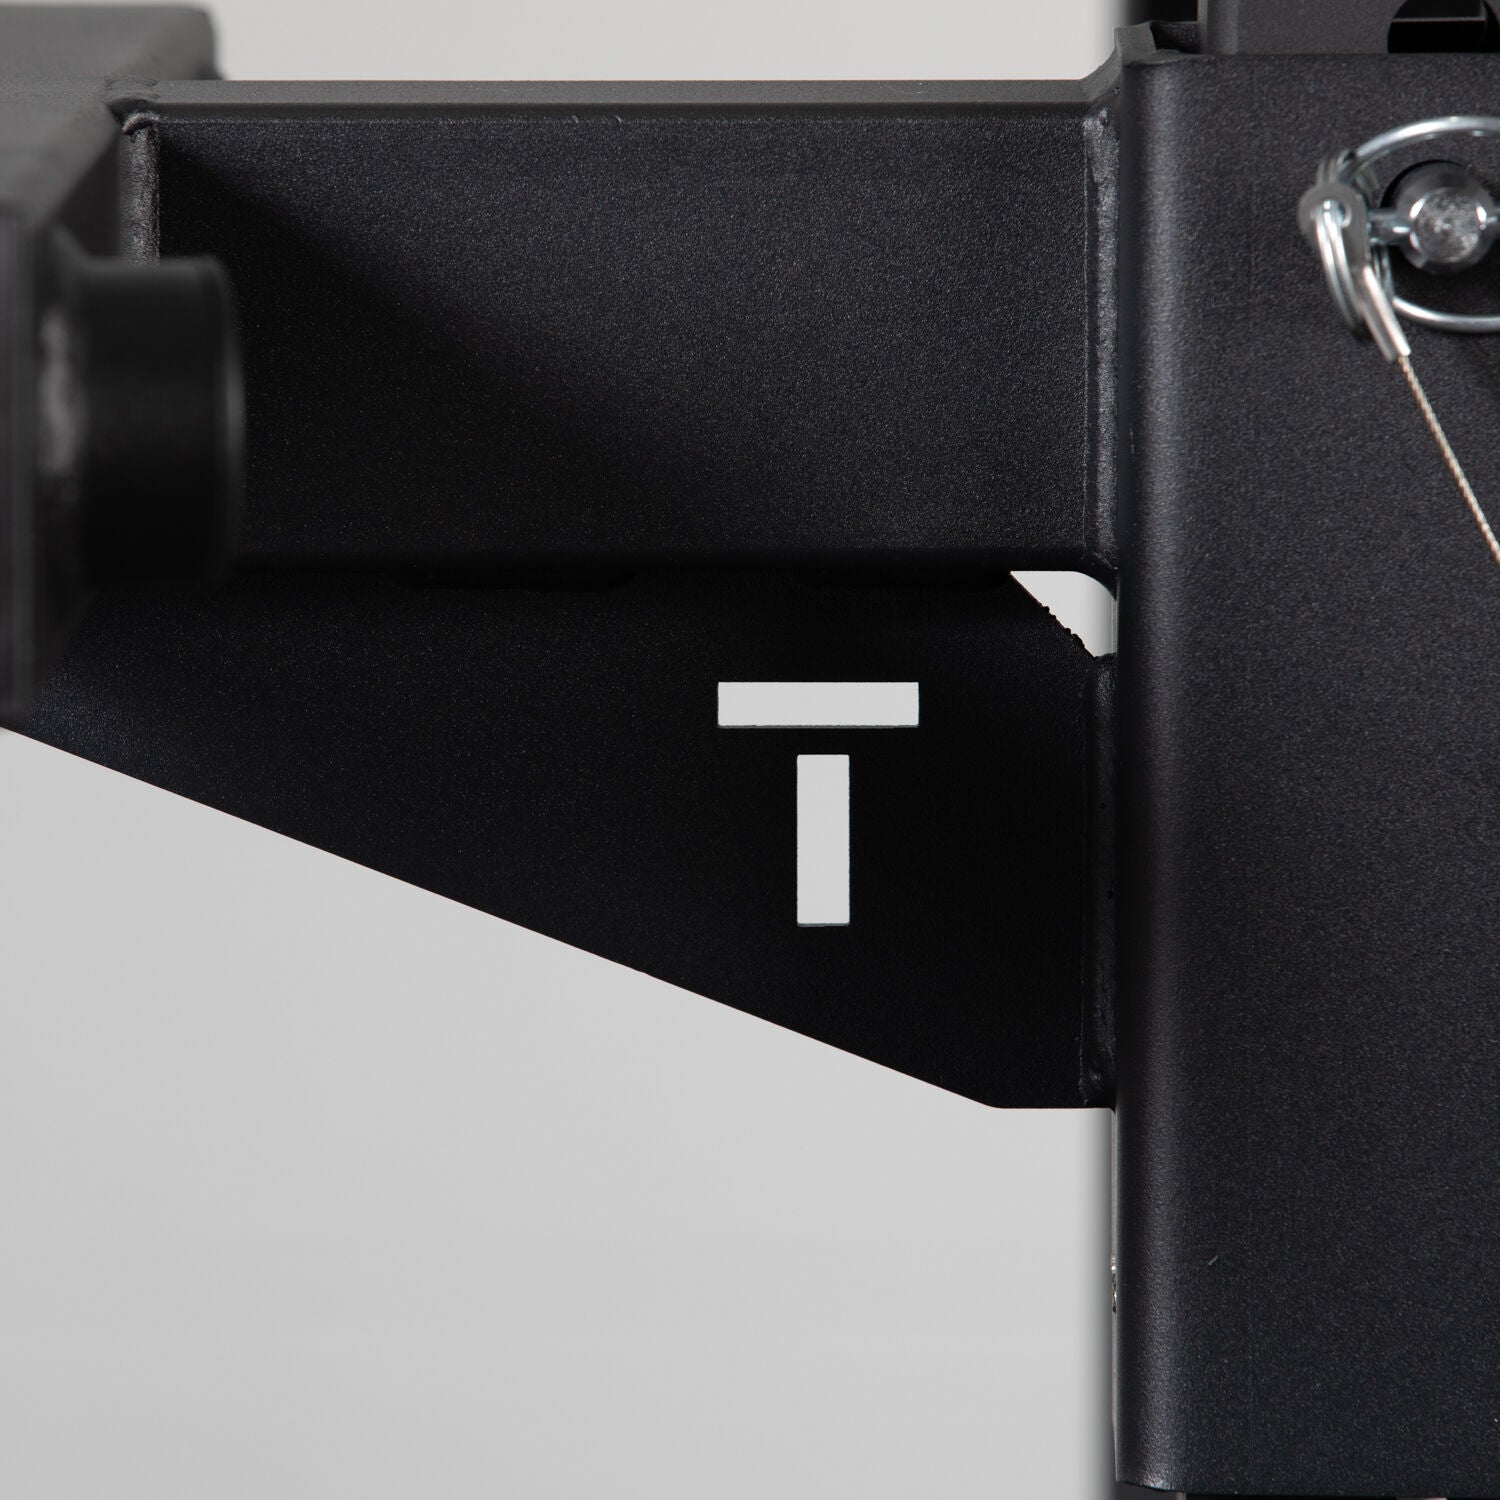 Close-up of a black metal bracket from Titan Fitness X-3 Series Y-Dip Attachment station with a white letter 't' marking, partially obscured, with a visible bolt and shadow detailing.